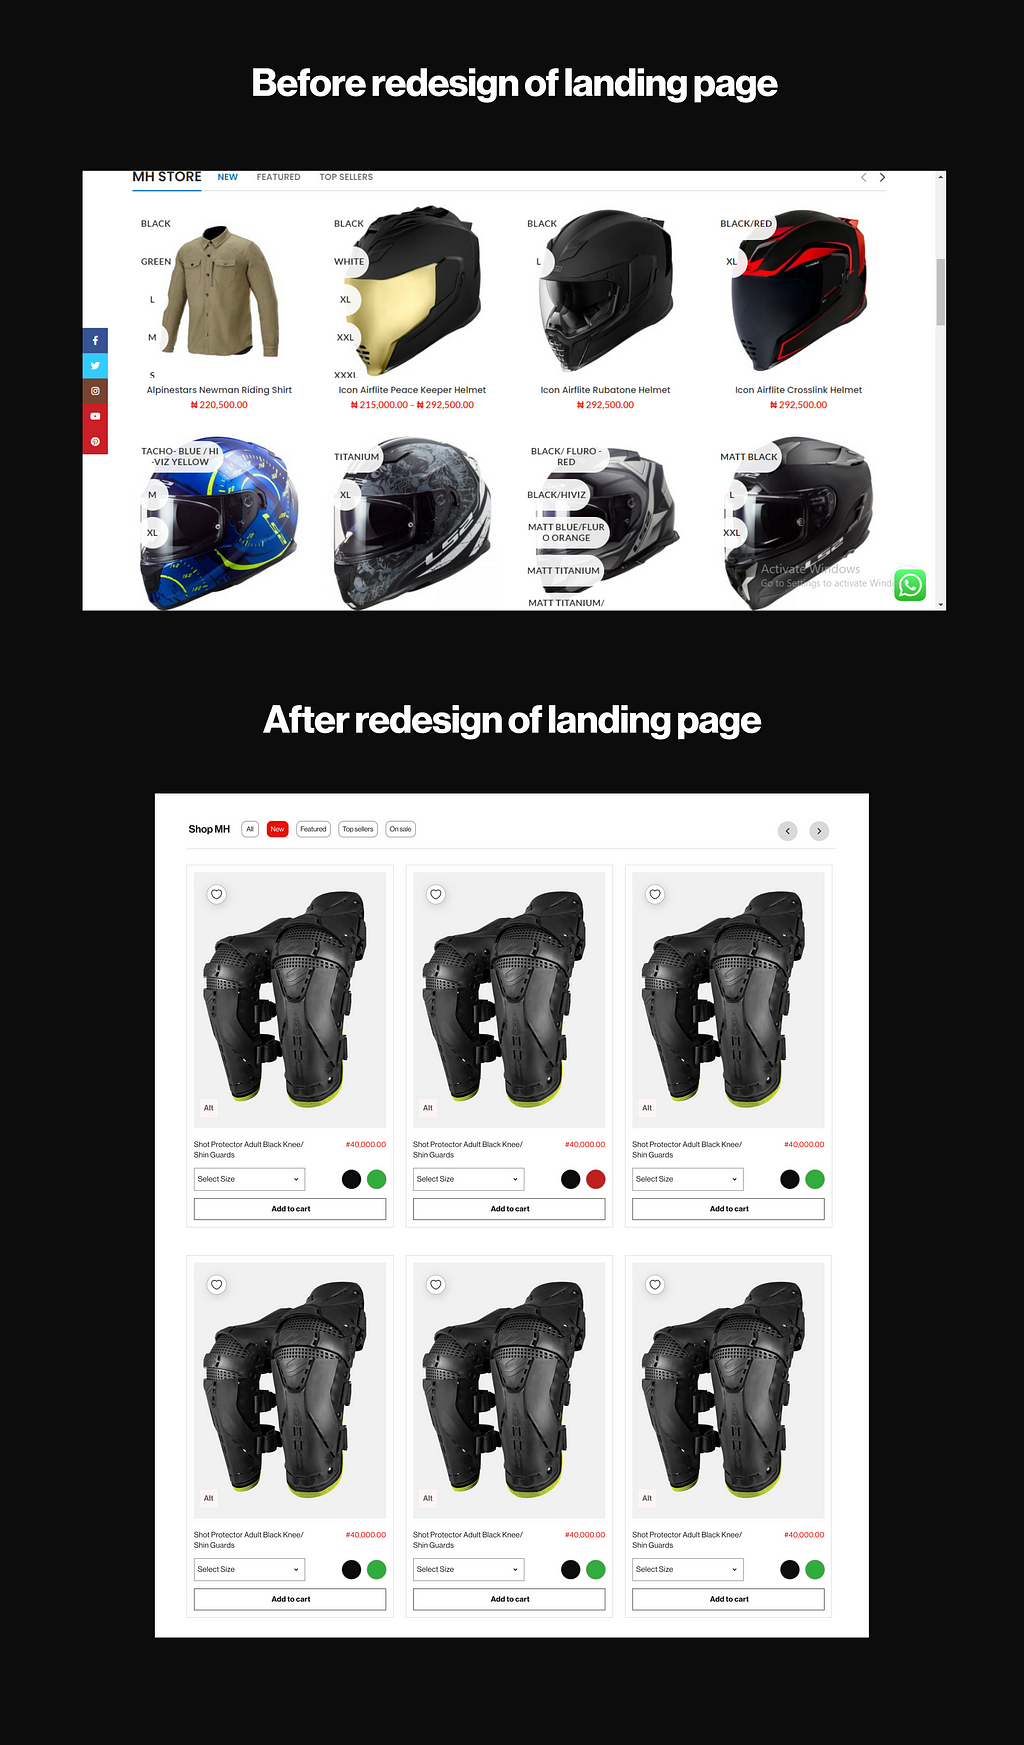 Before and after redesigning a section of the landing page to give it a cleaner look